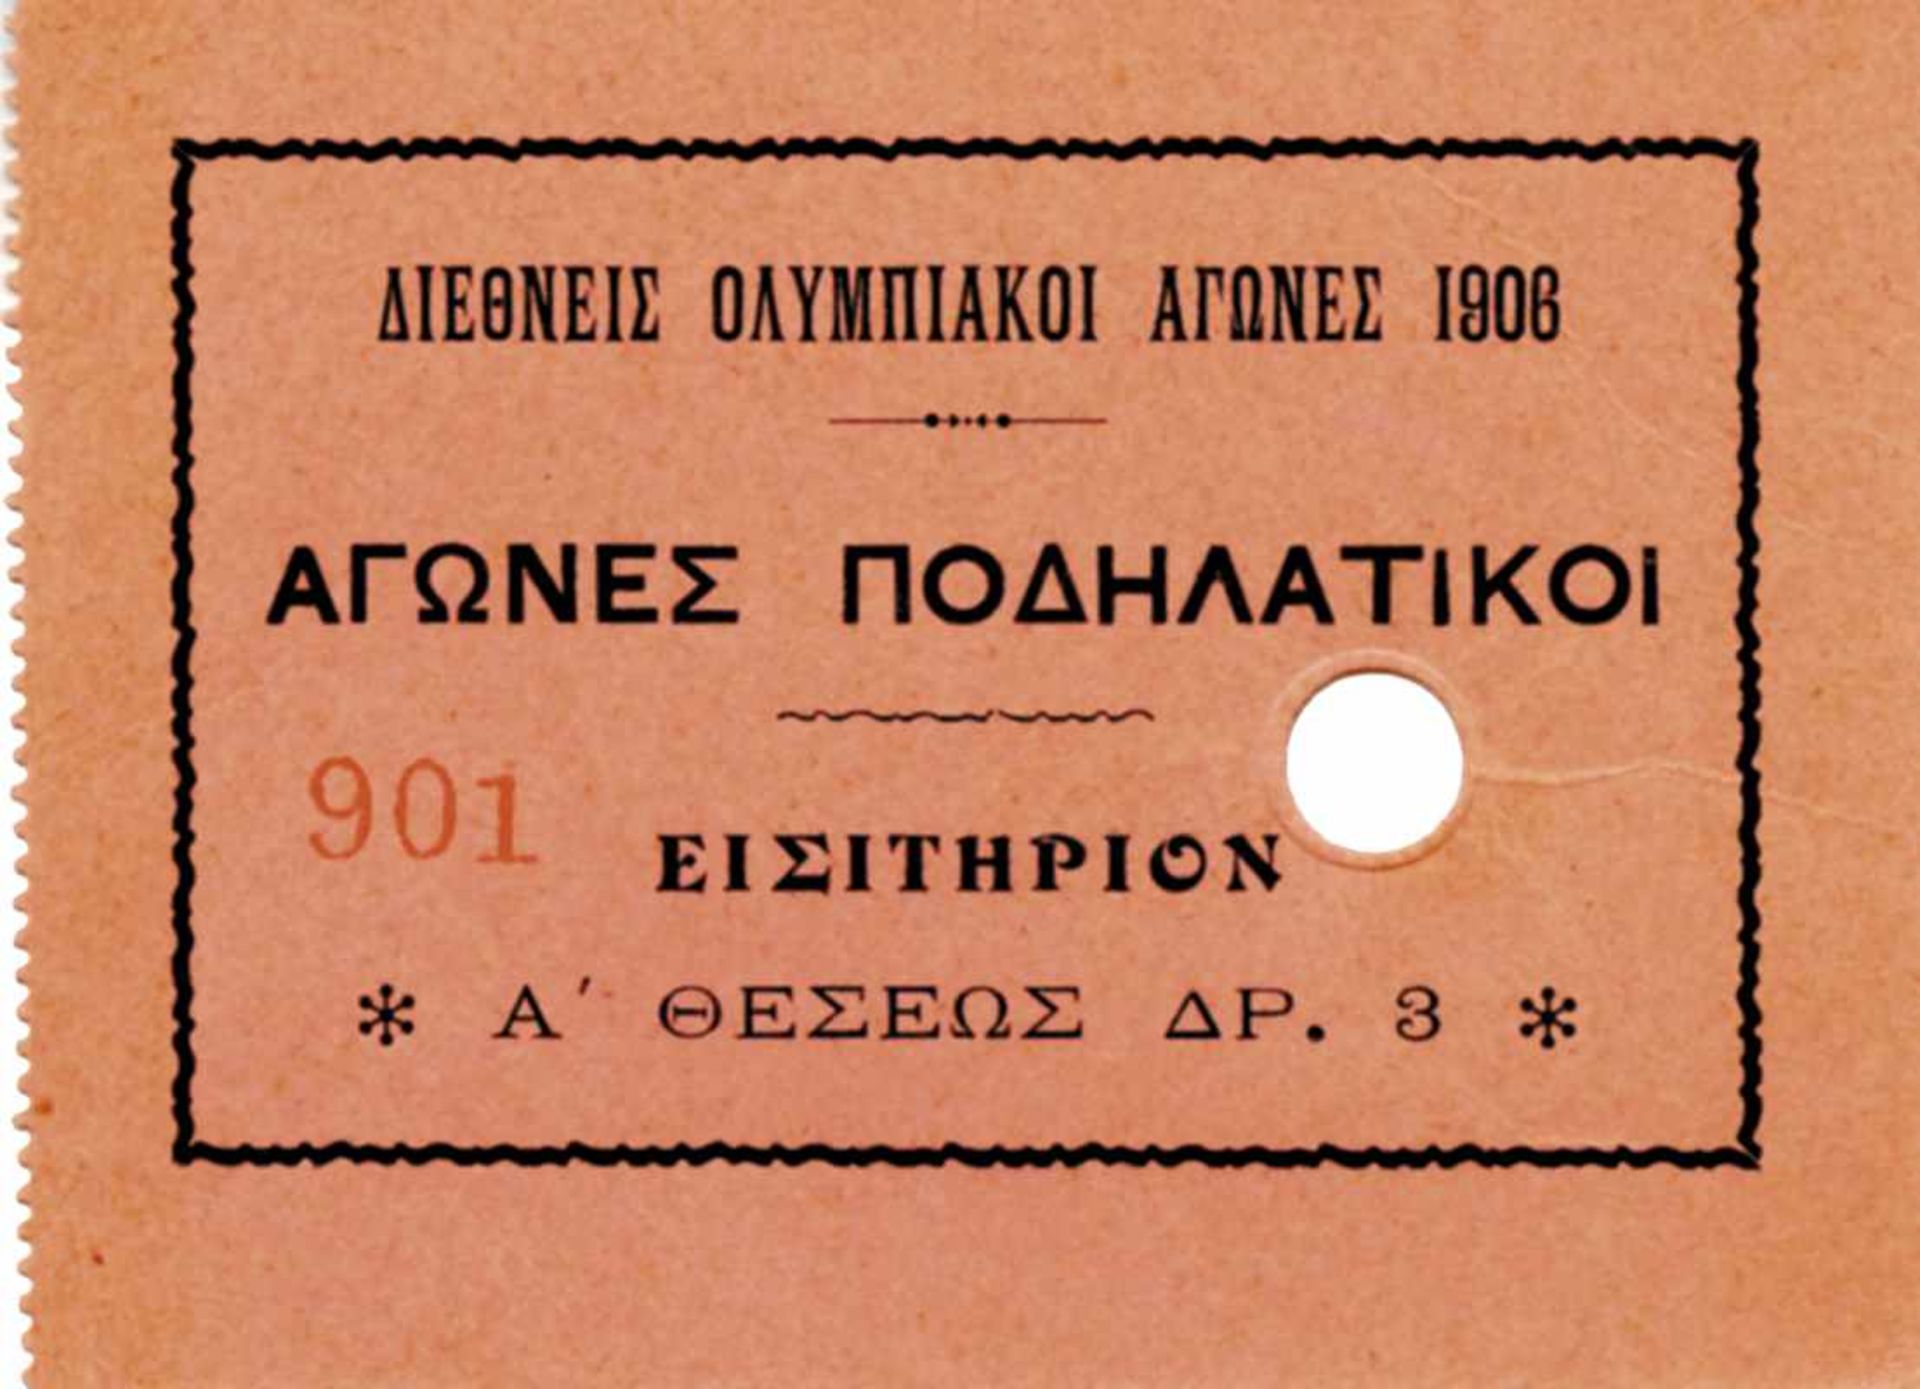 Olympic Games 1906. Official stadium Ticket - Olympic Games 1906. Official stadium ticket for the